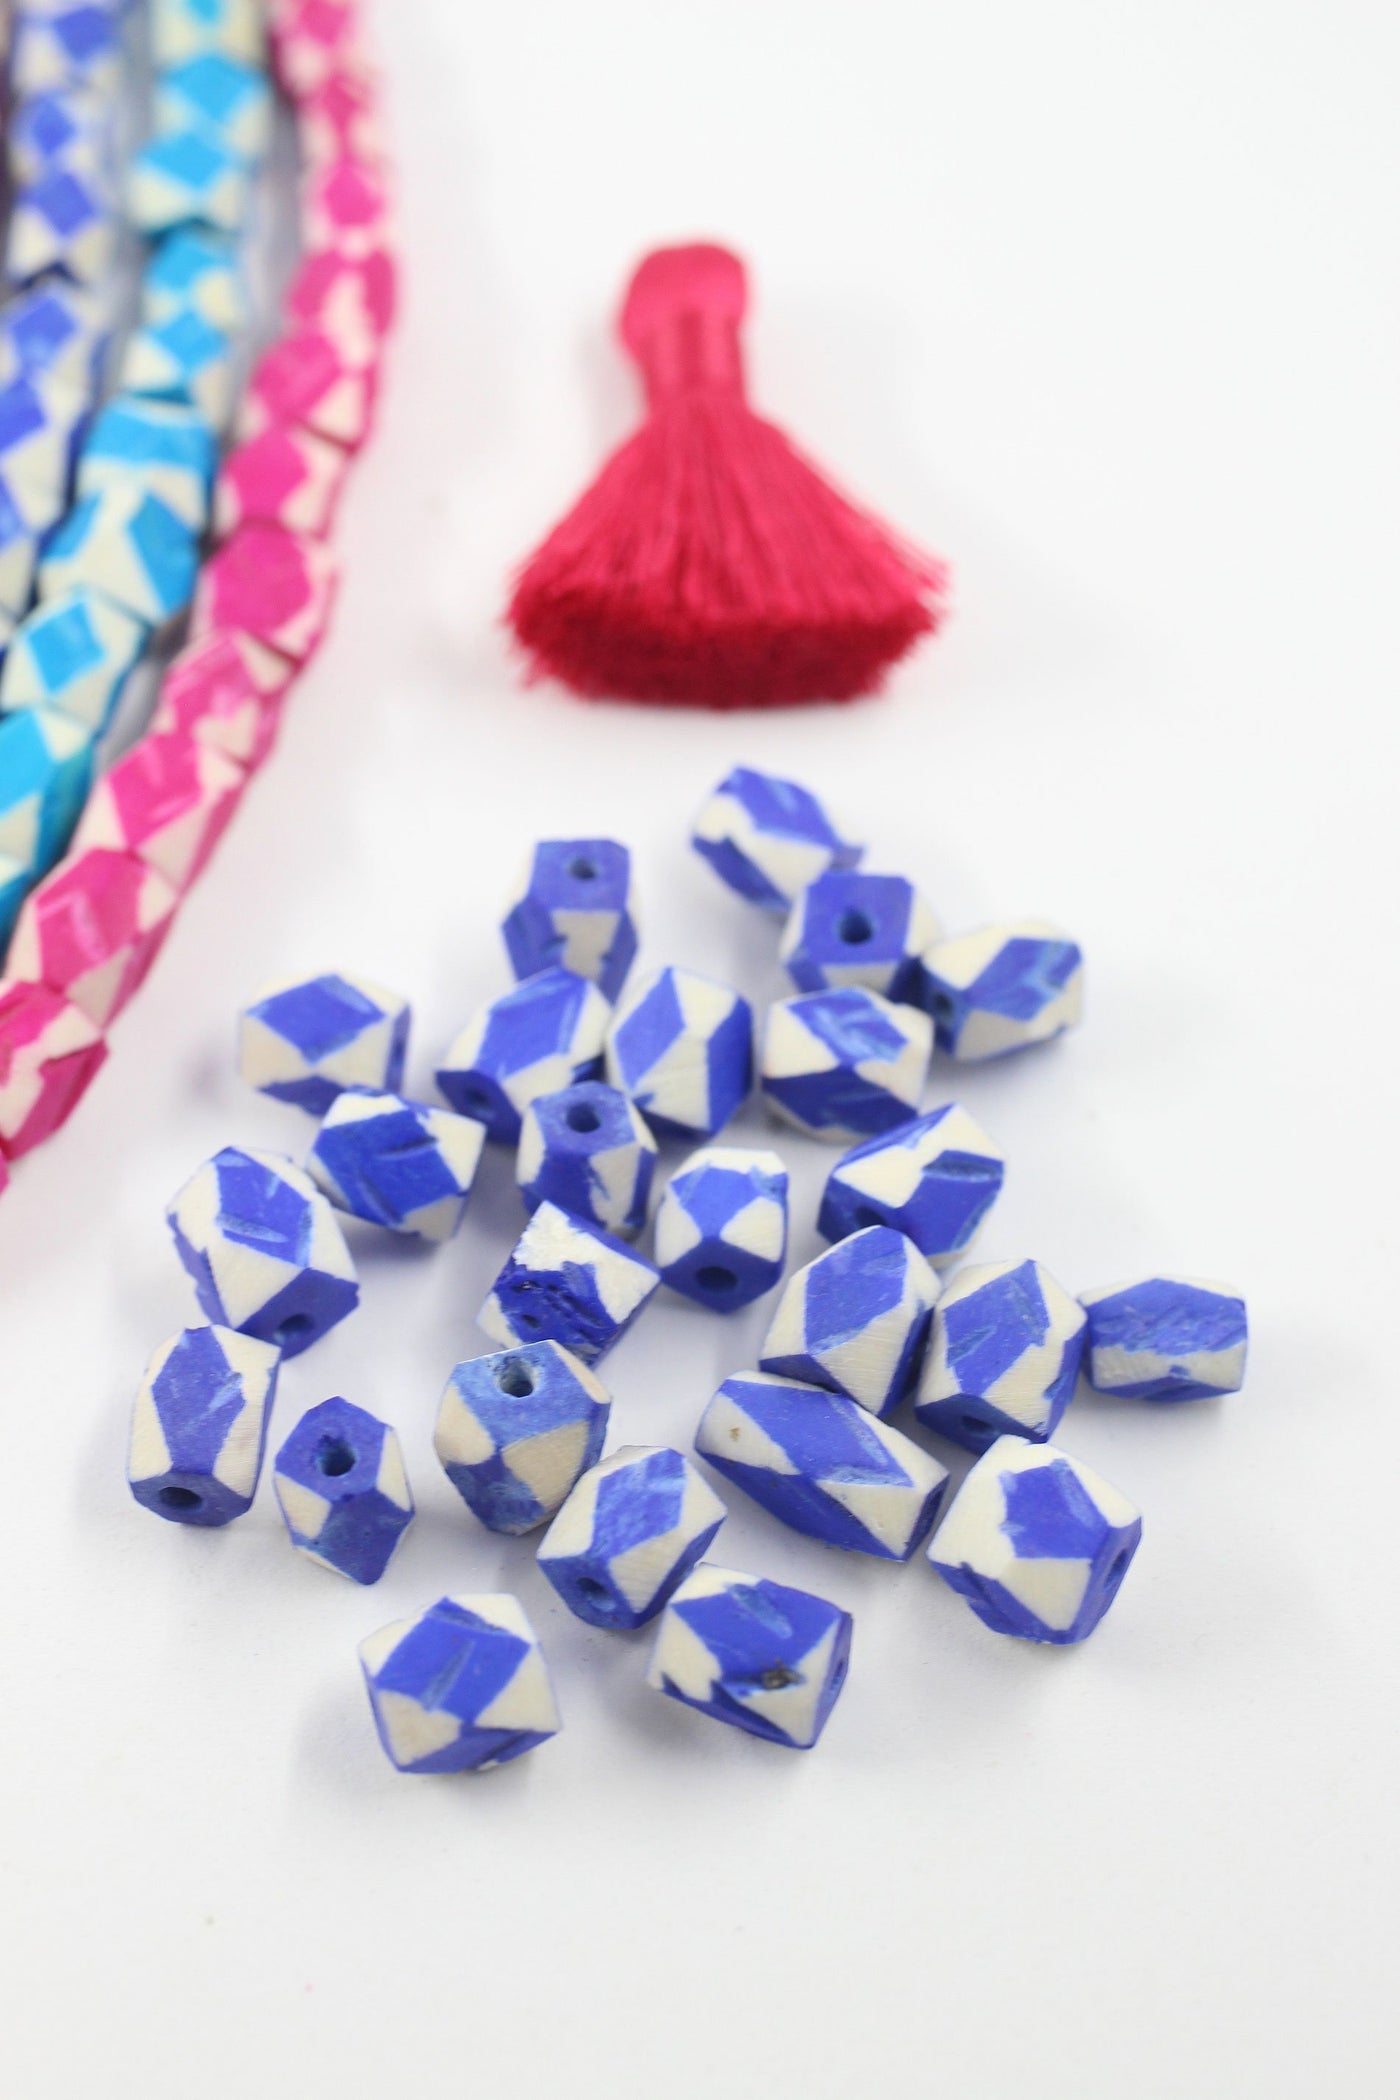 Blue Argyle Beads from India, DIY Jewelry Making Supplies